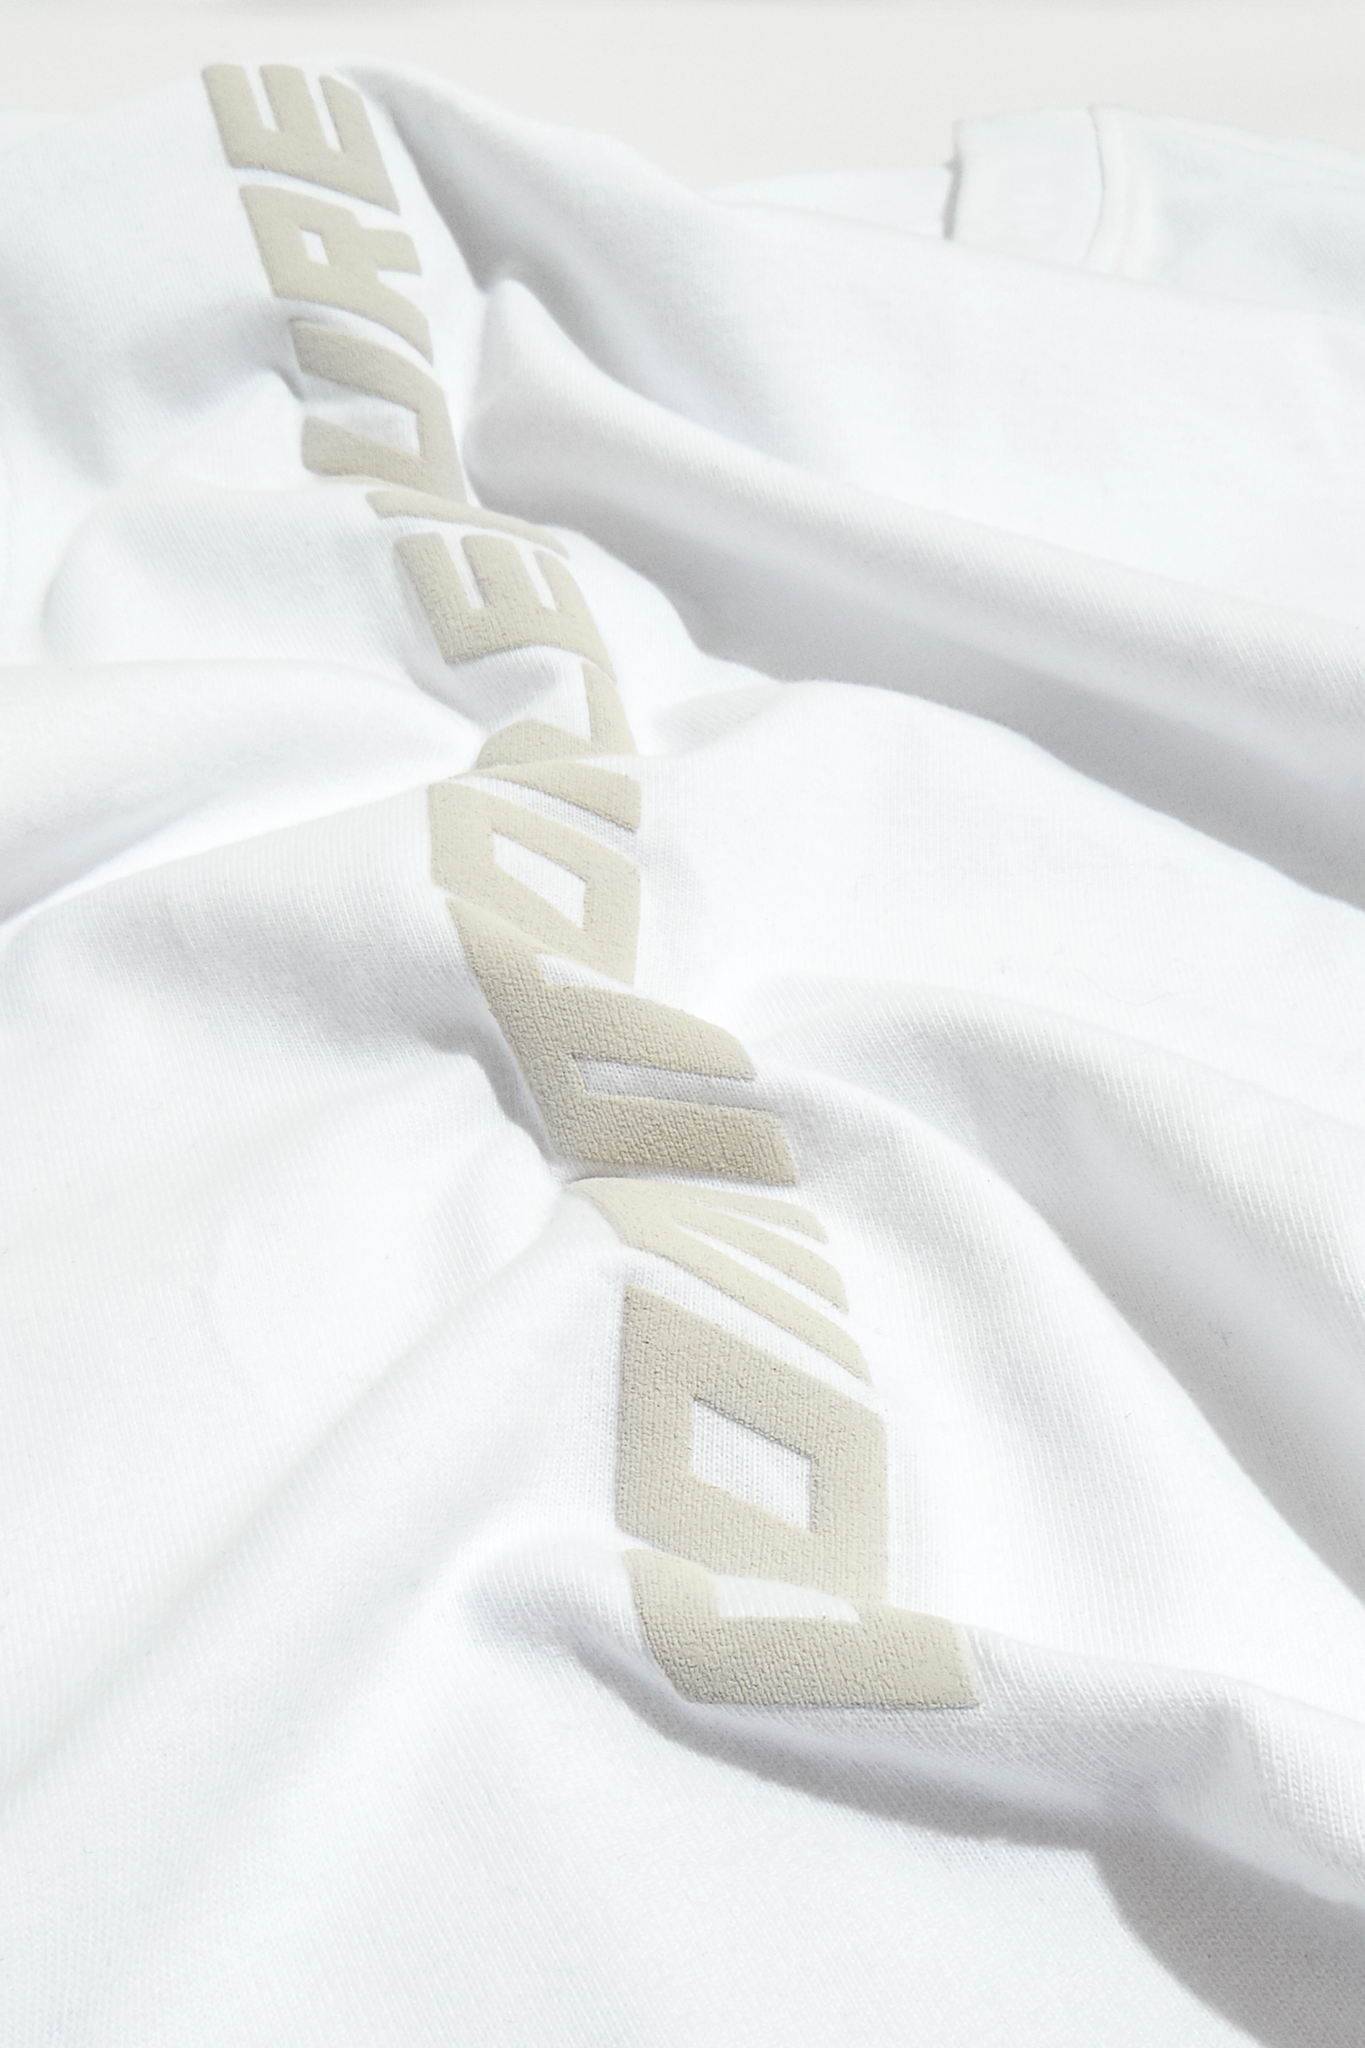 CL TYPOGRAPHY BRANDED LONG SLEEVE T-SHIRT